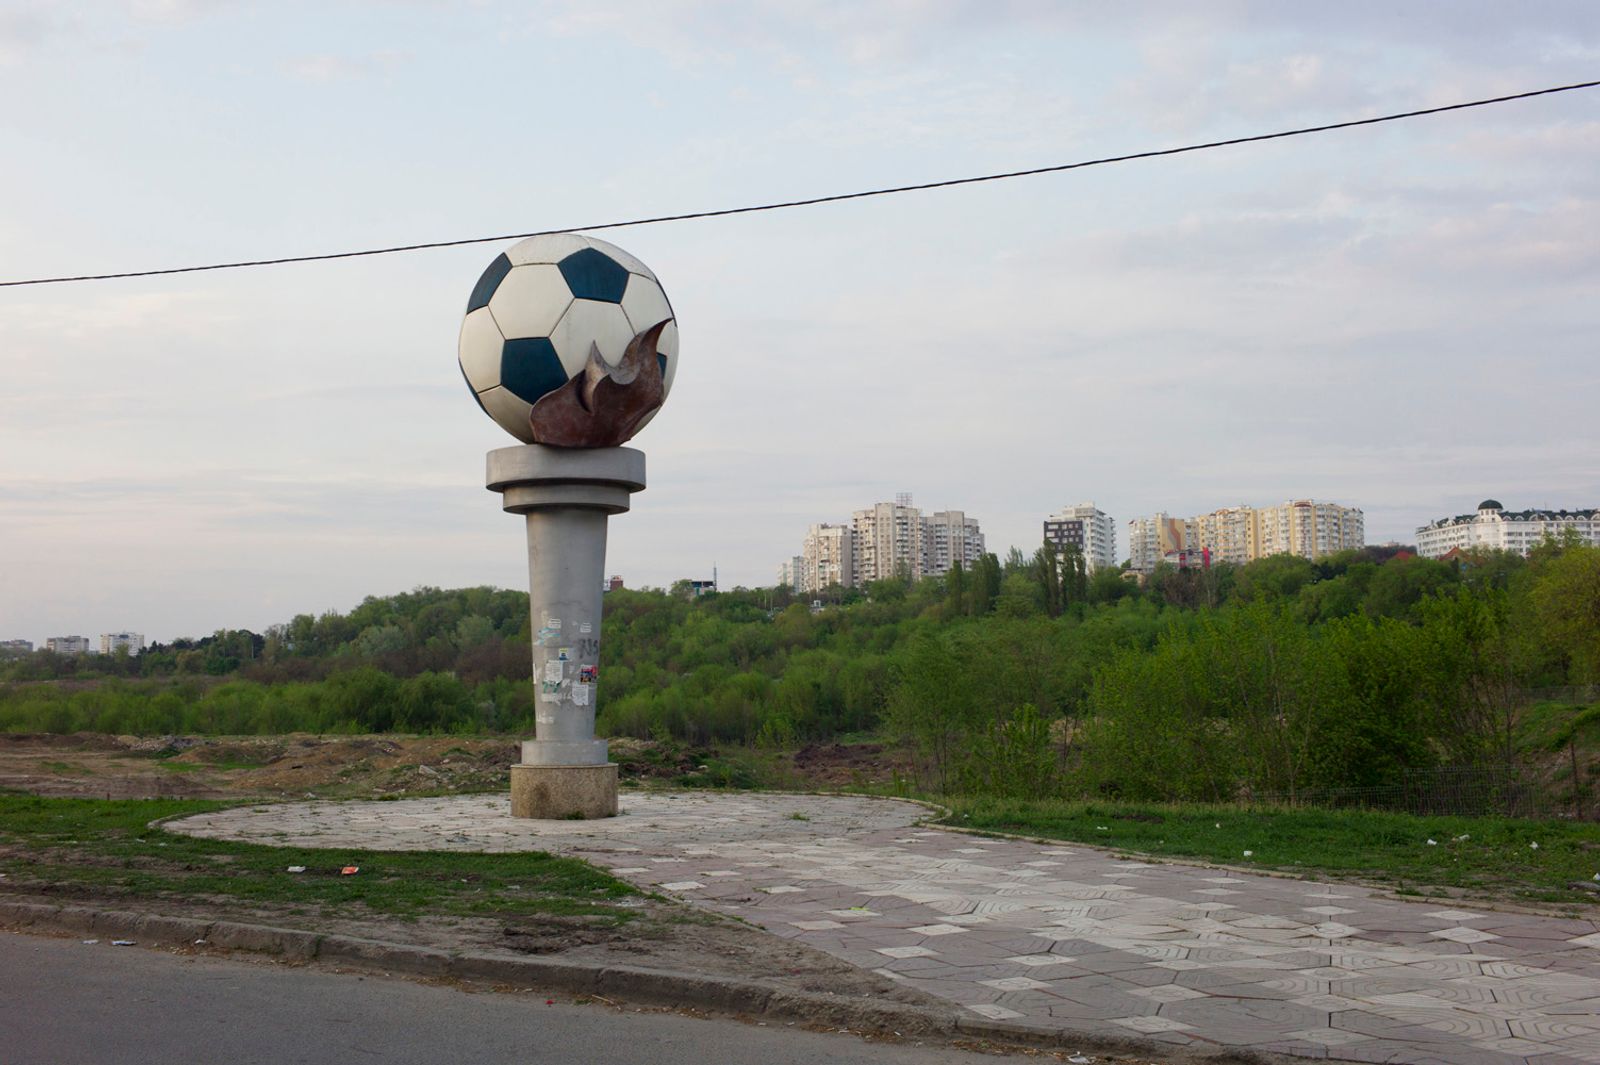 © Chiara Dazi - Image from the The Moldovan derby photography project